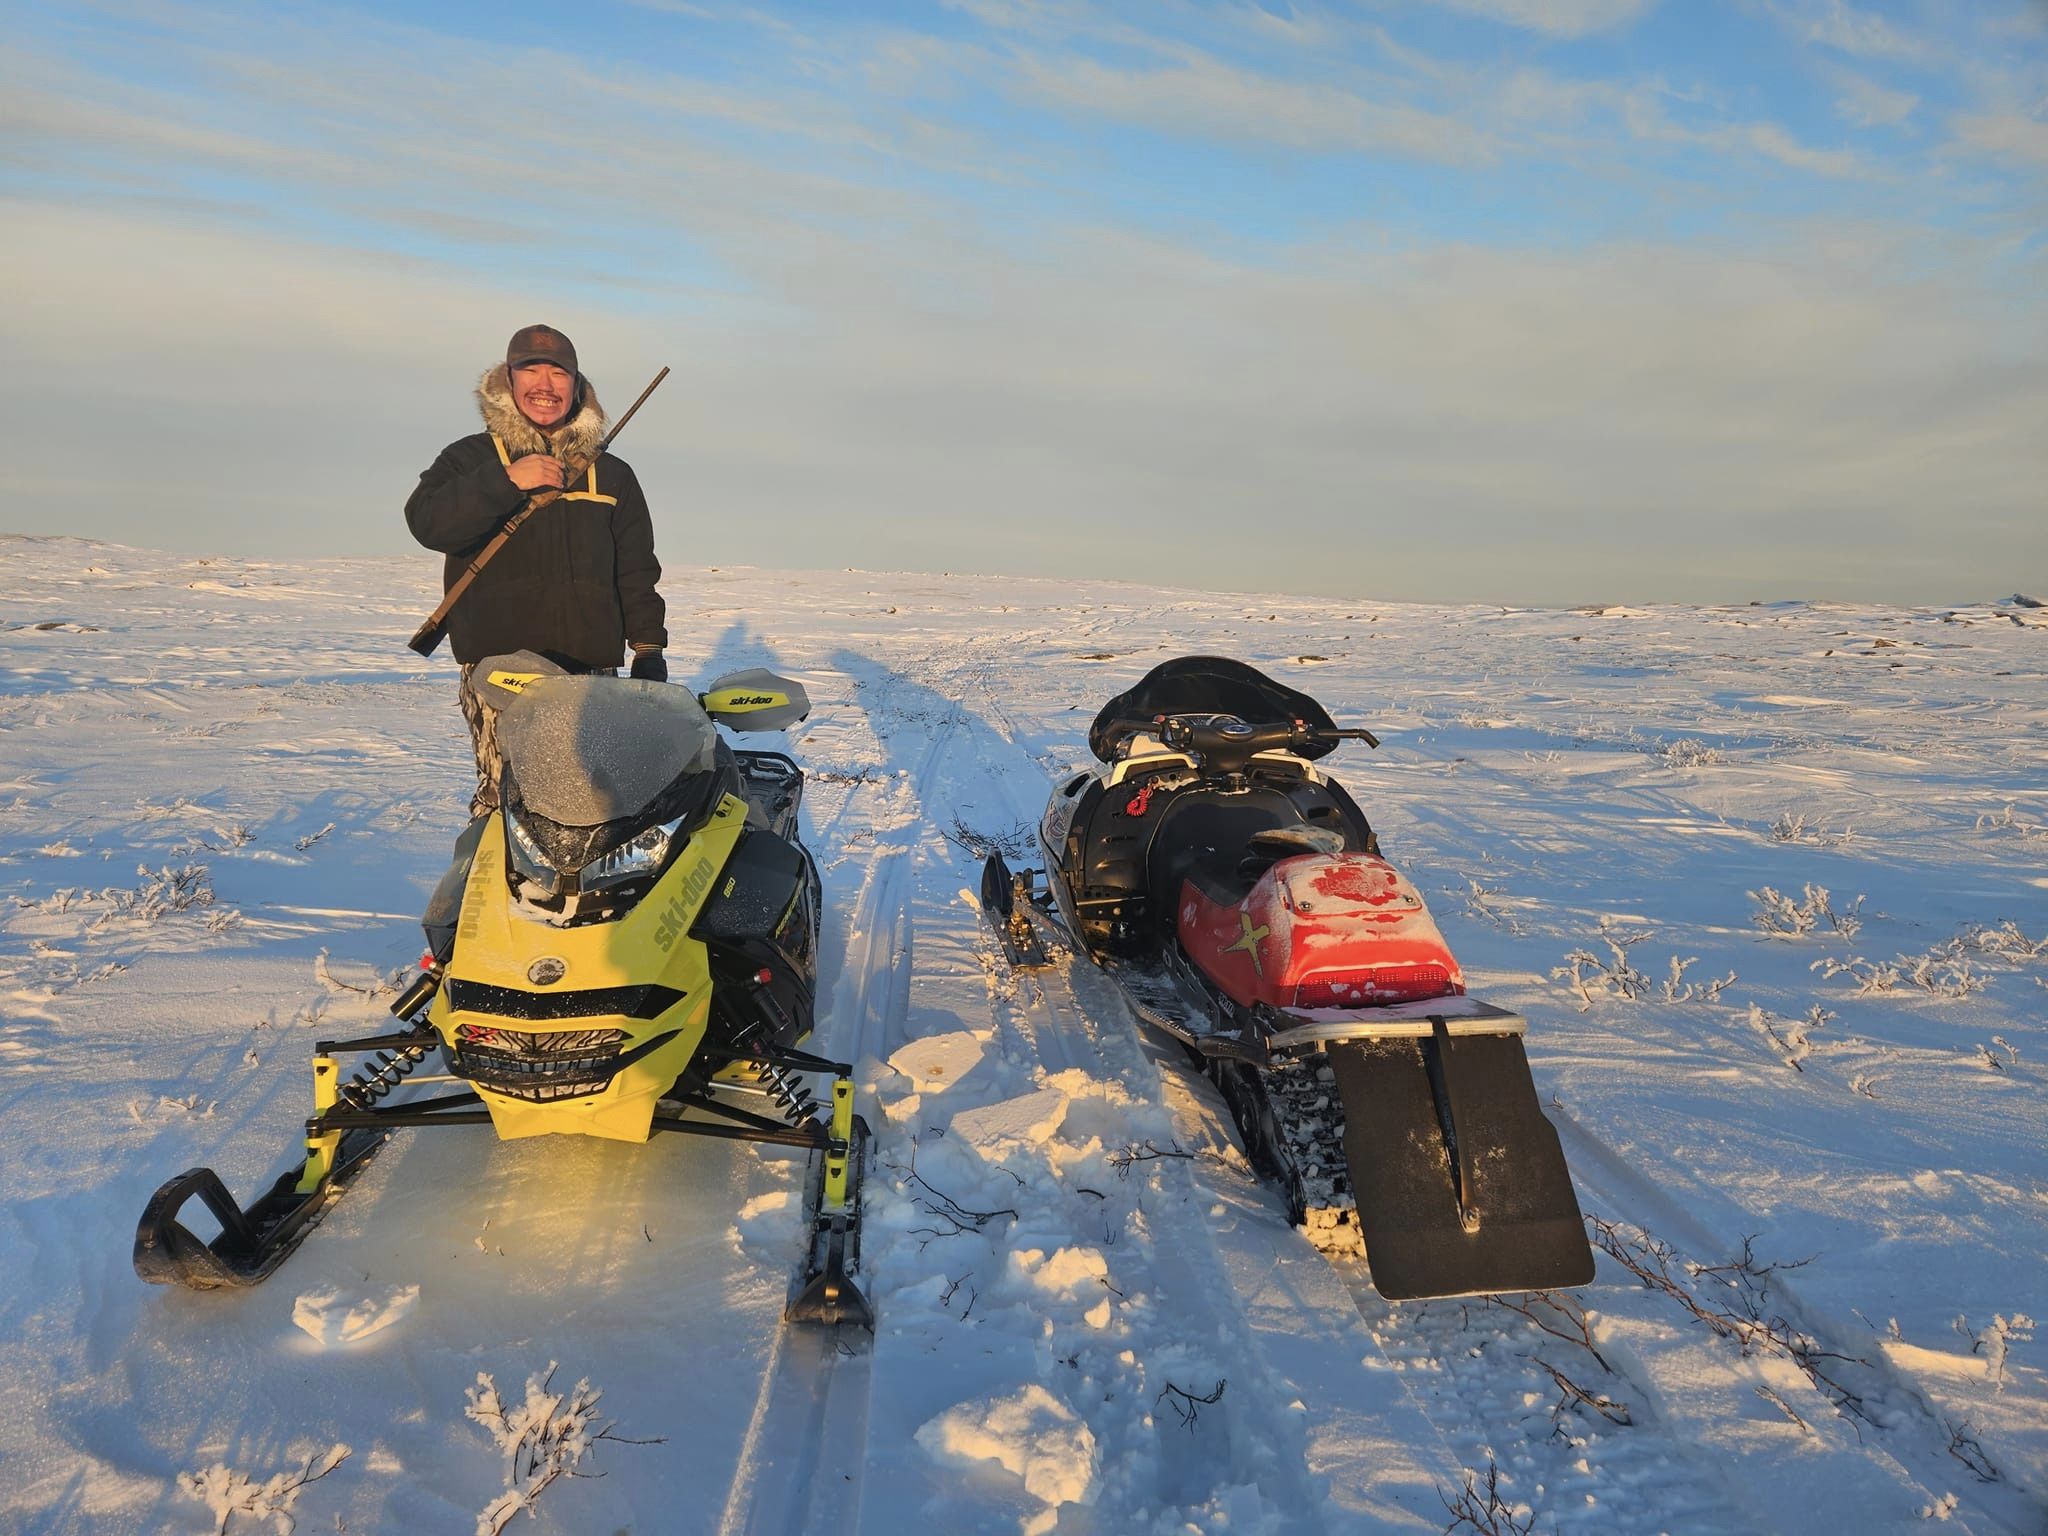 An Inuk man on a yellow snowmobile with a riderless red snowmobile beside him